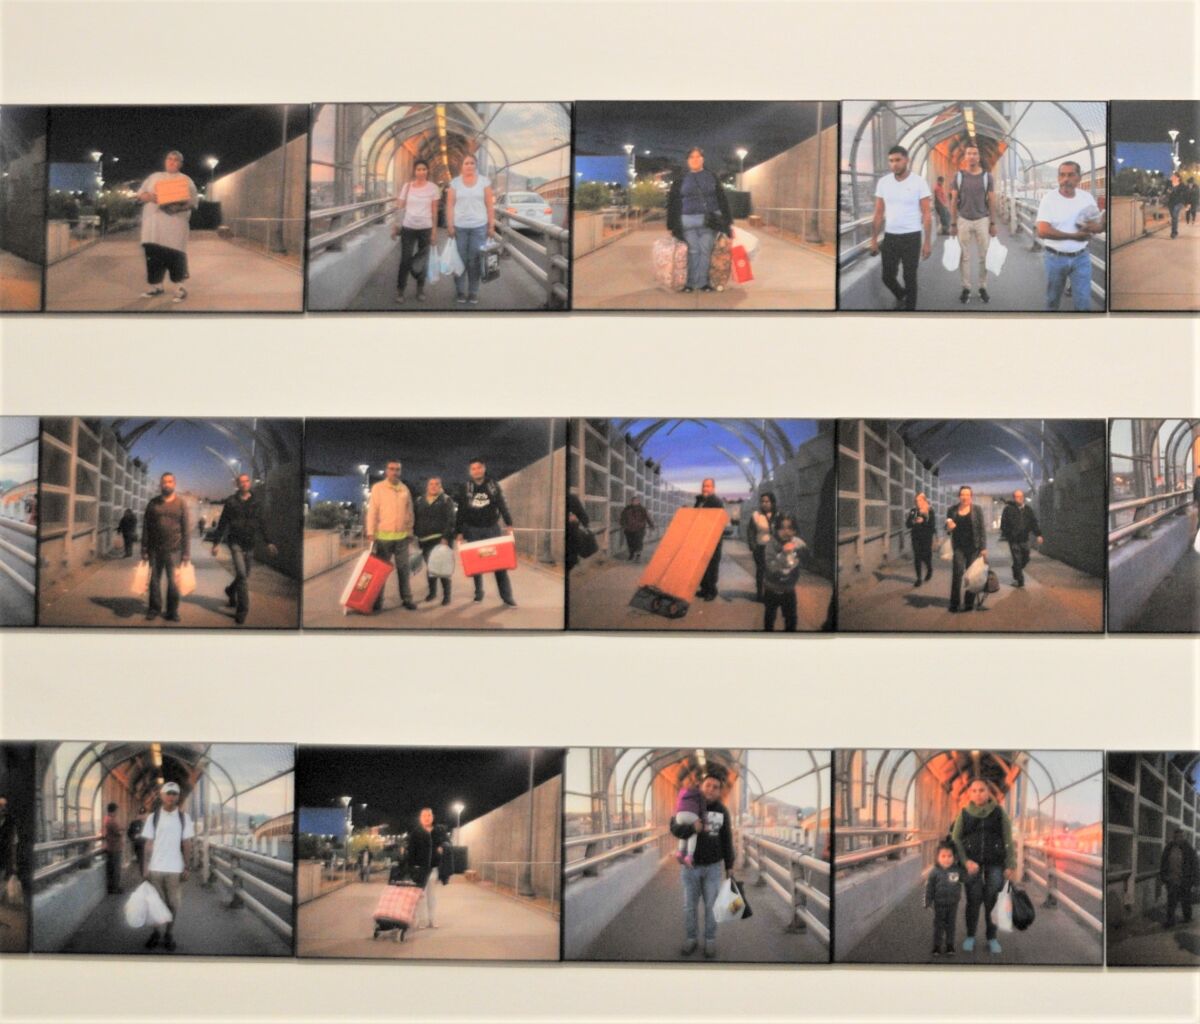 “Mexican Shoppers” is a collection of photos by Ingrid Leyva that documents Mexican nationals toting shopping bags and boxes as they cross the border back to Mexico after shopping in the U.S.